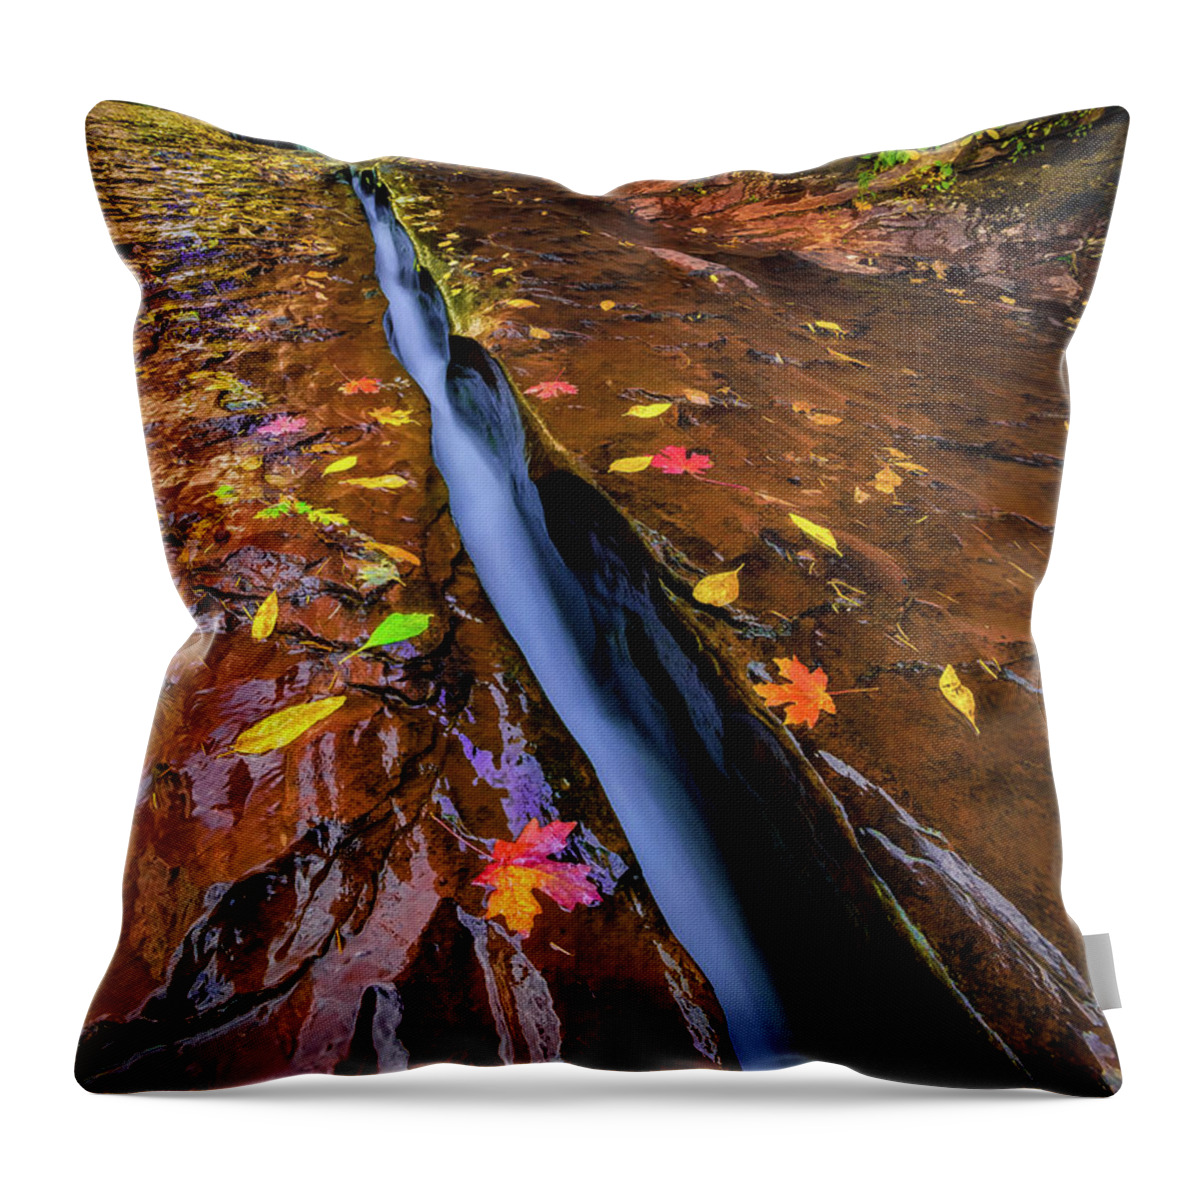 Zion National Park Throw Pillow featuring the photograph The Crack by Dave Koch